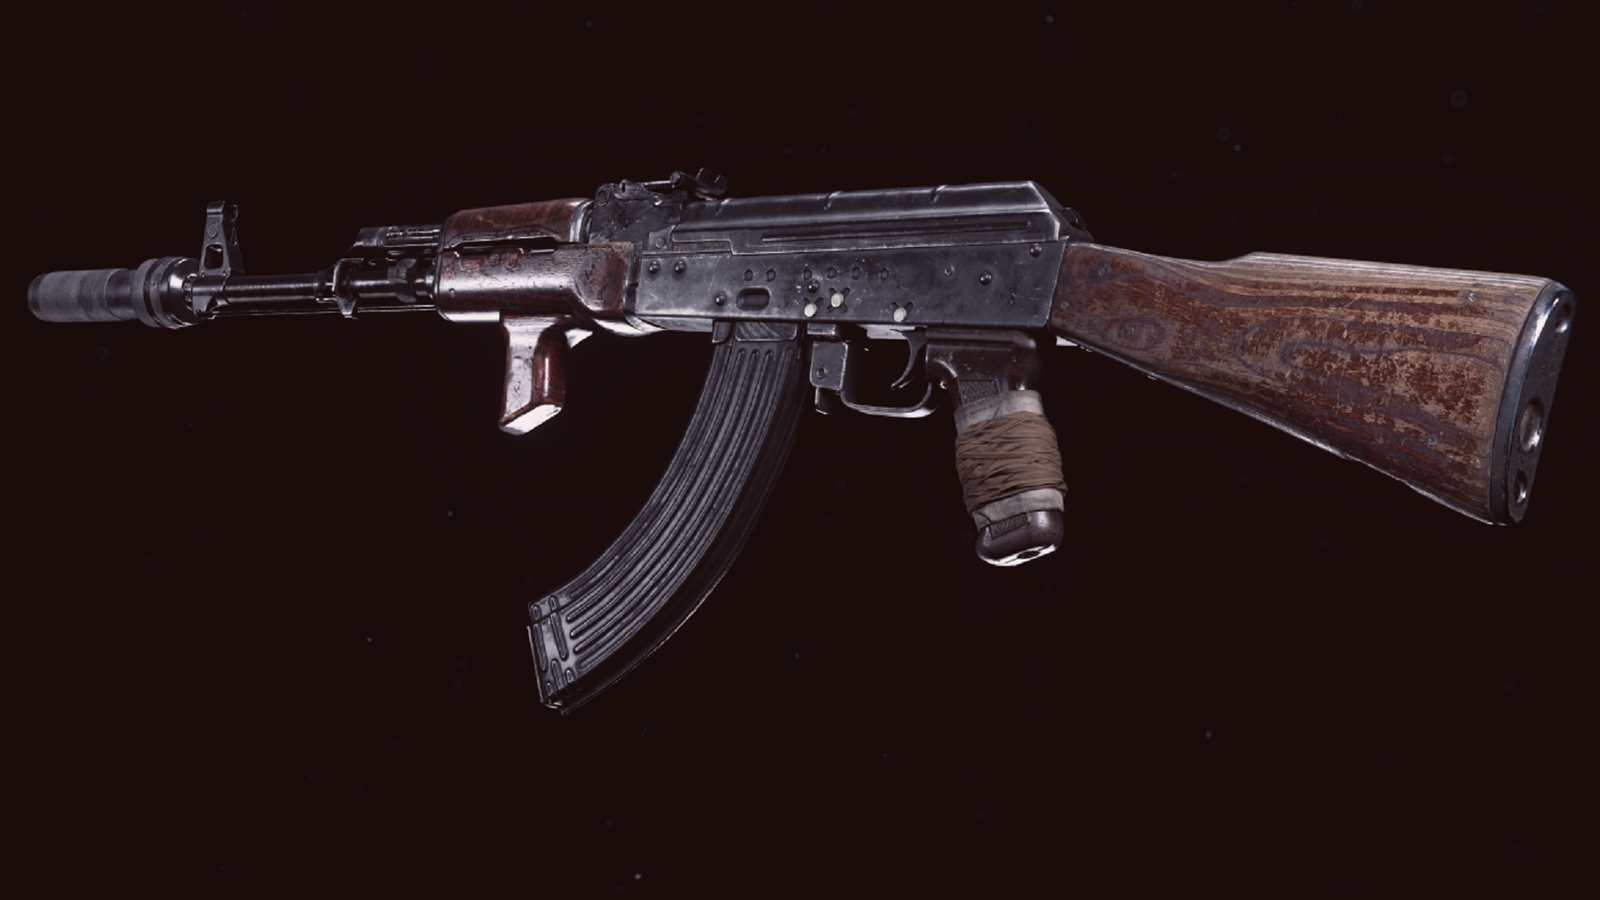 Weapons Expert Reacts to the AK-47 In Counter-Strike, Warzone and More